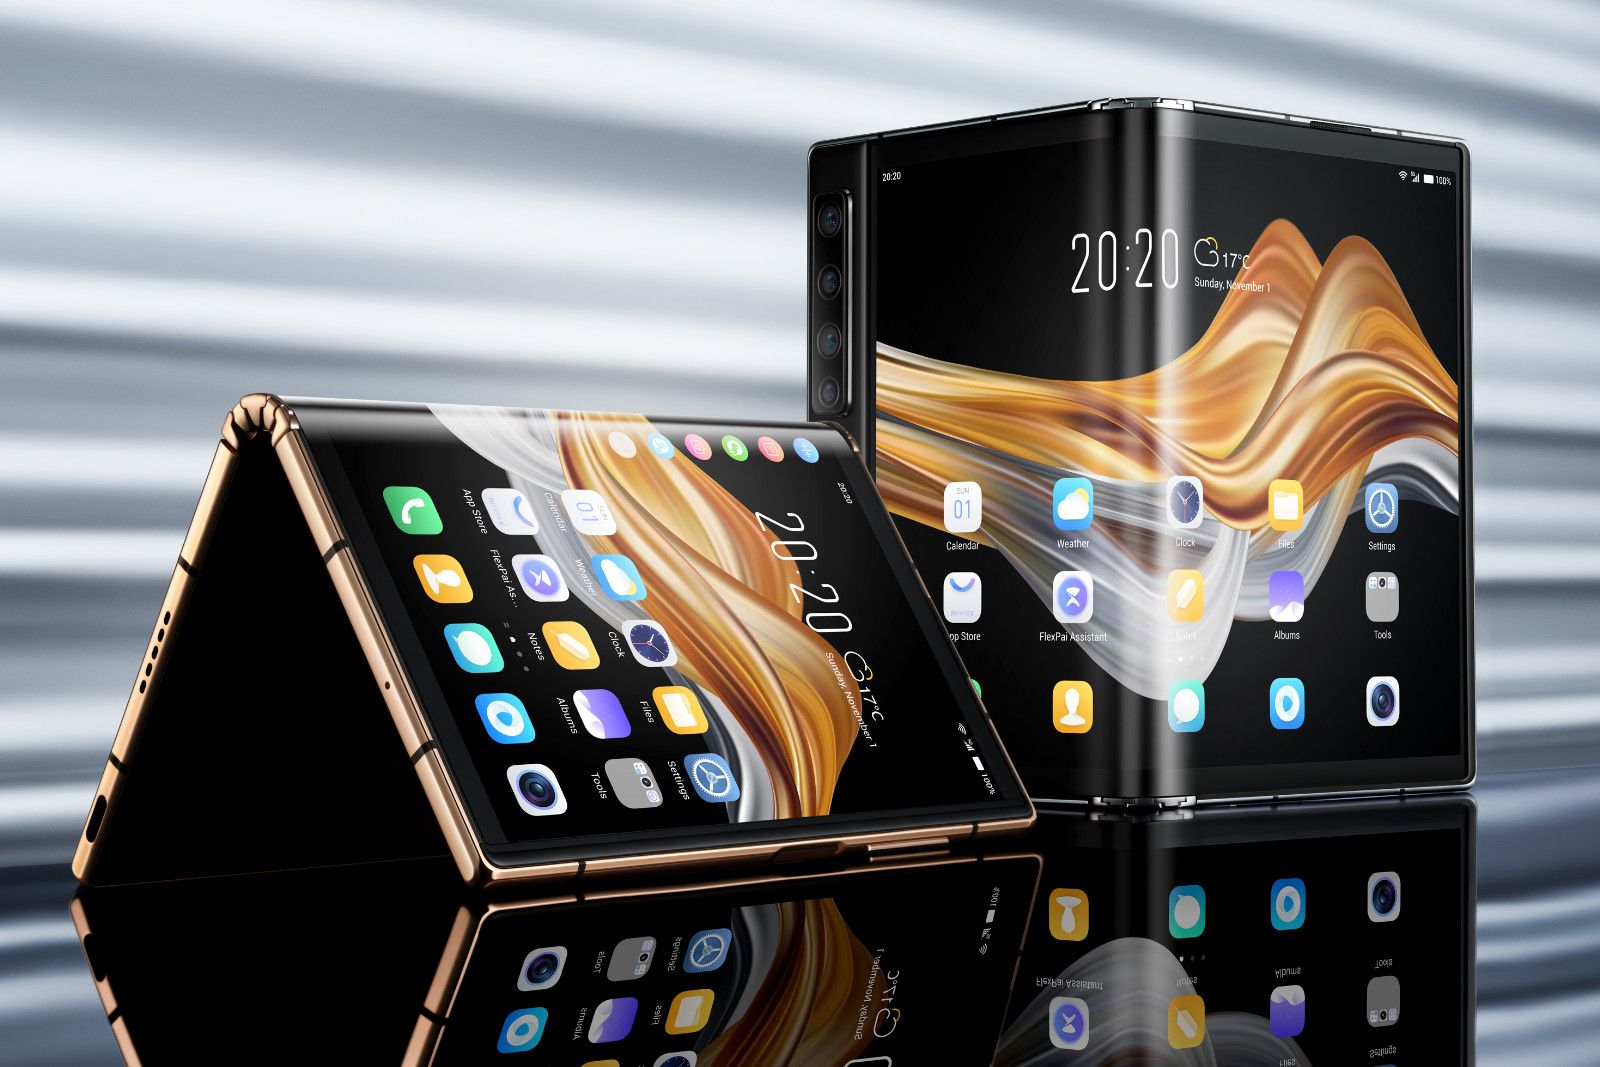 Royole's FlexPai 2 brings faster touch response and a more durable hinge to the foldable phone market photo 2